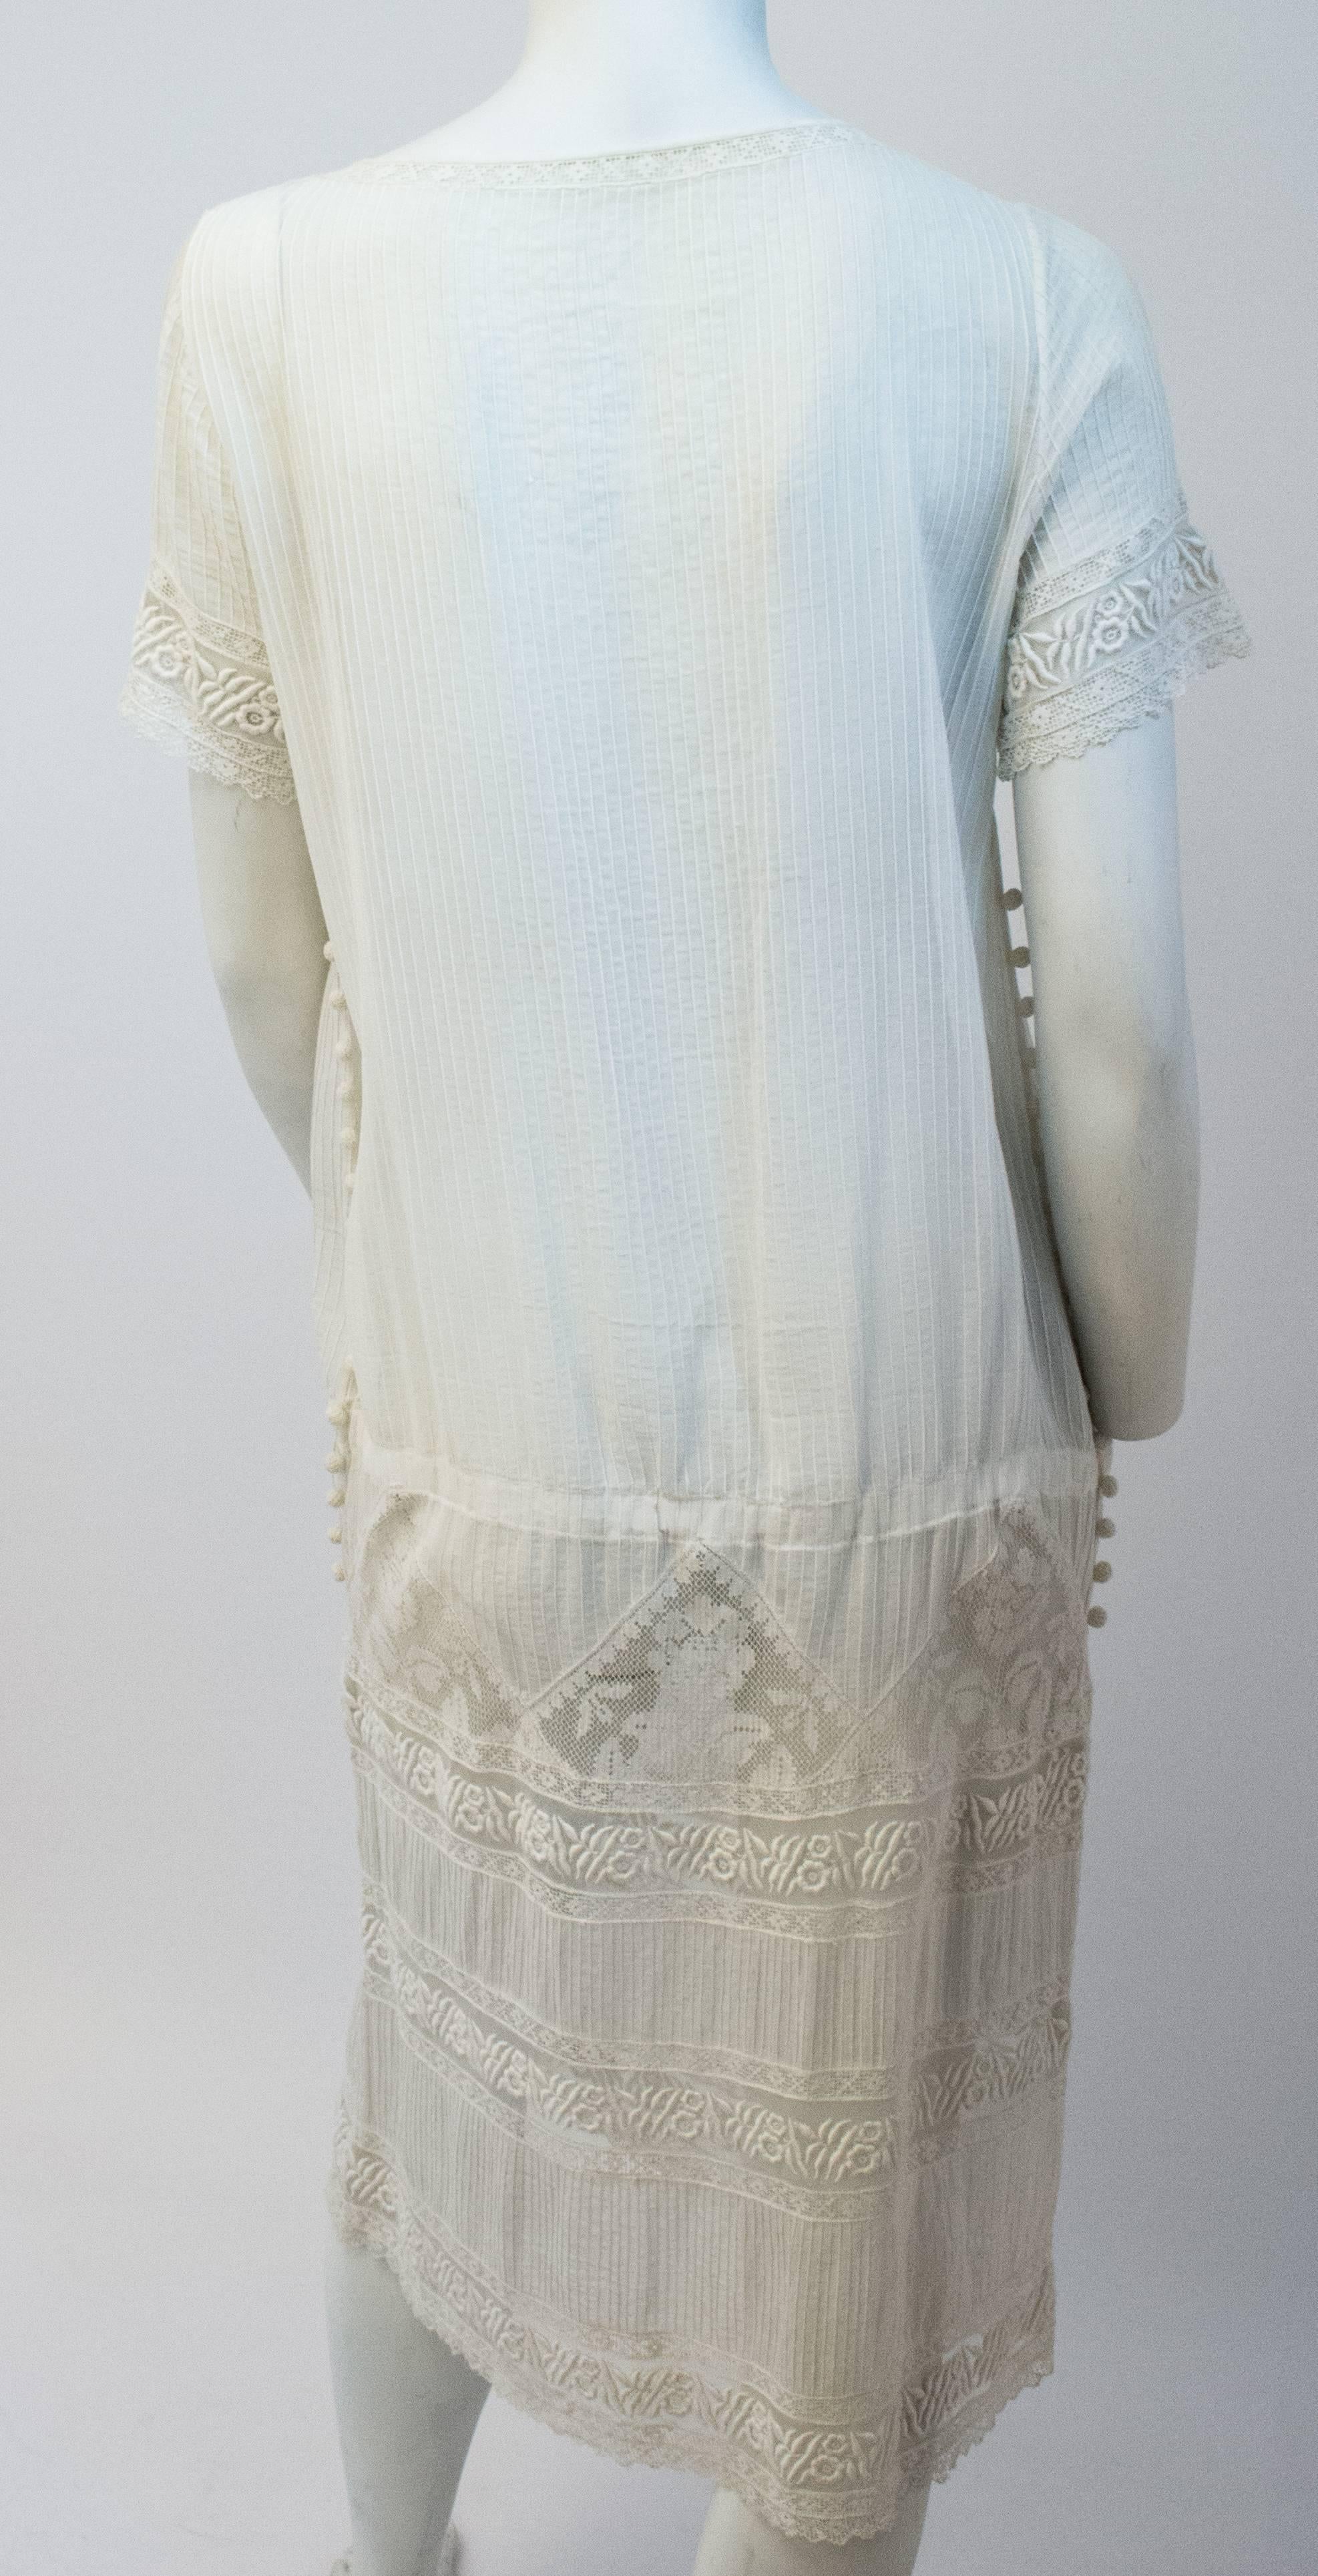 20s White Cotton Day Dress w/ Pintucks. Embroidered and crocheted lace. Decorative side crocheted baubles. No closures.